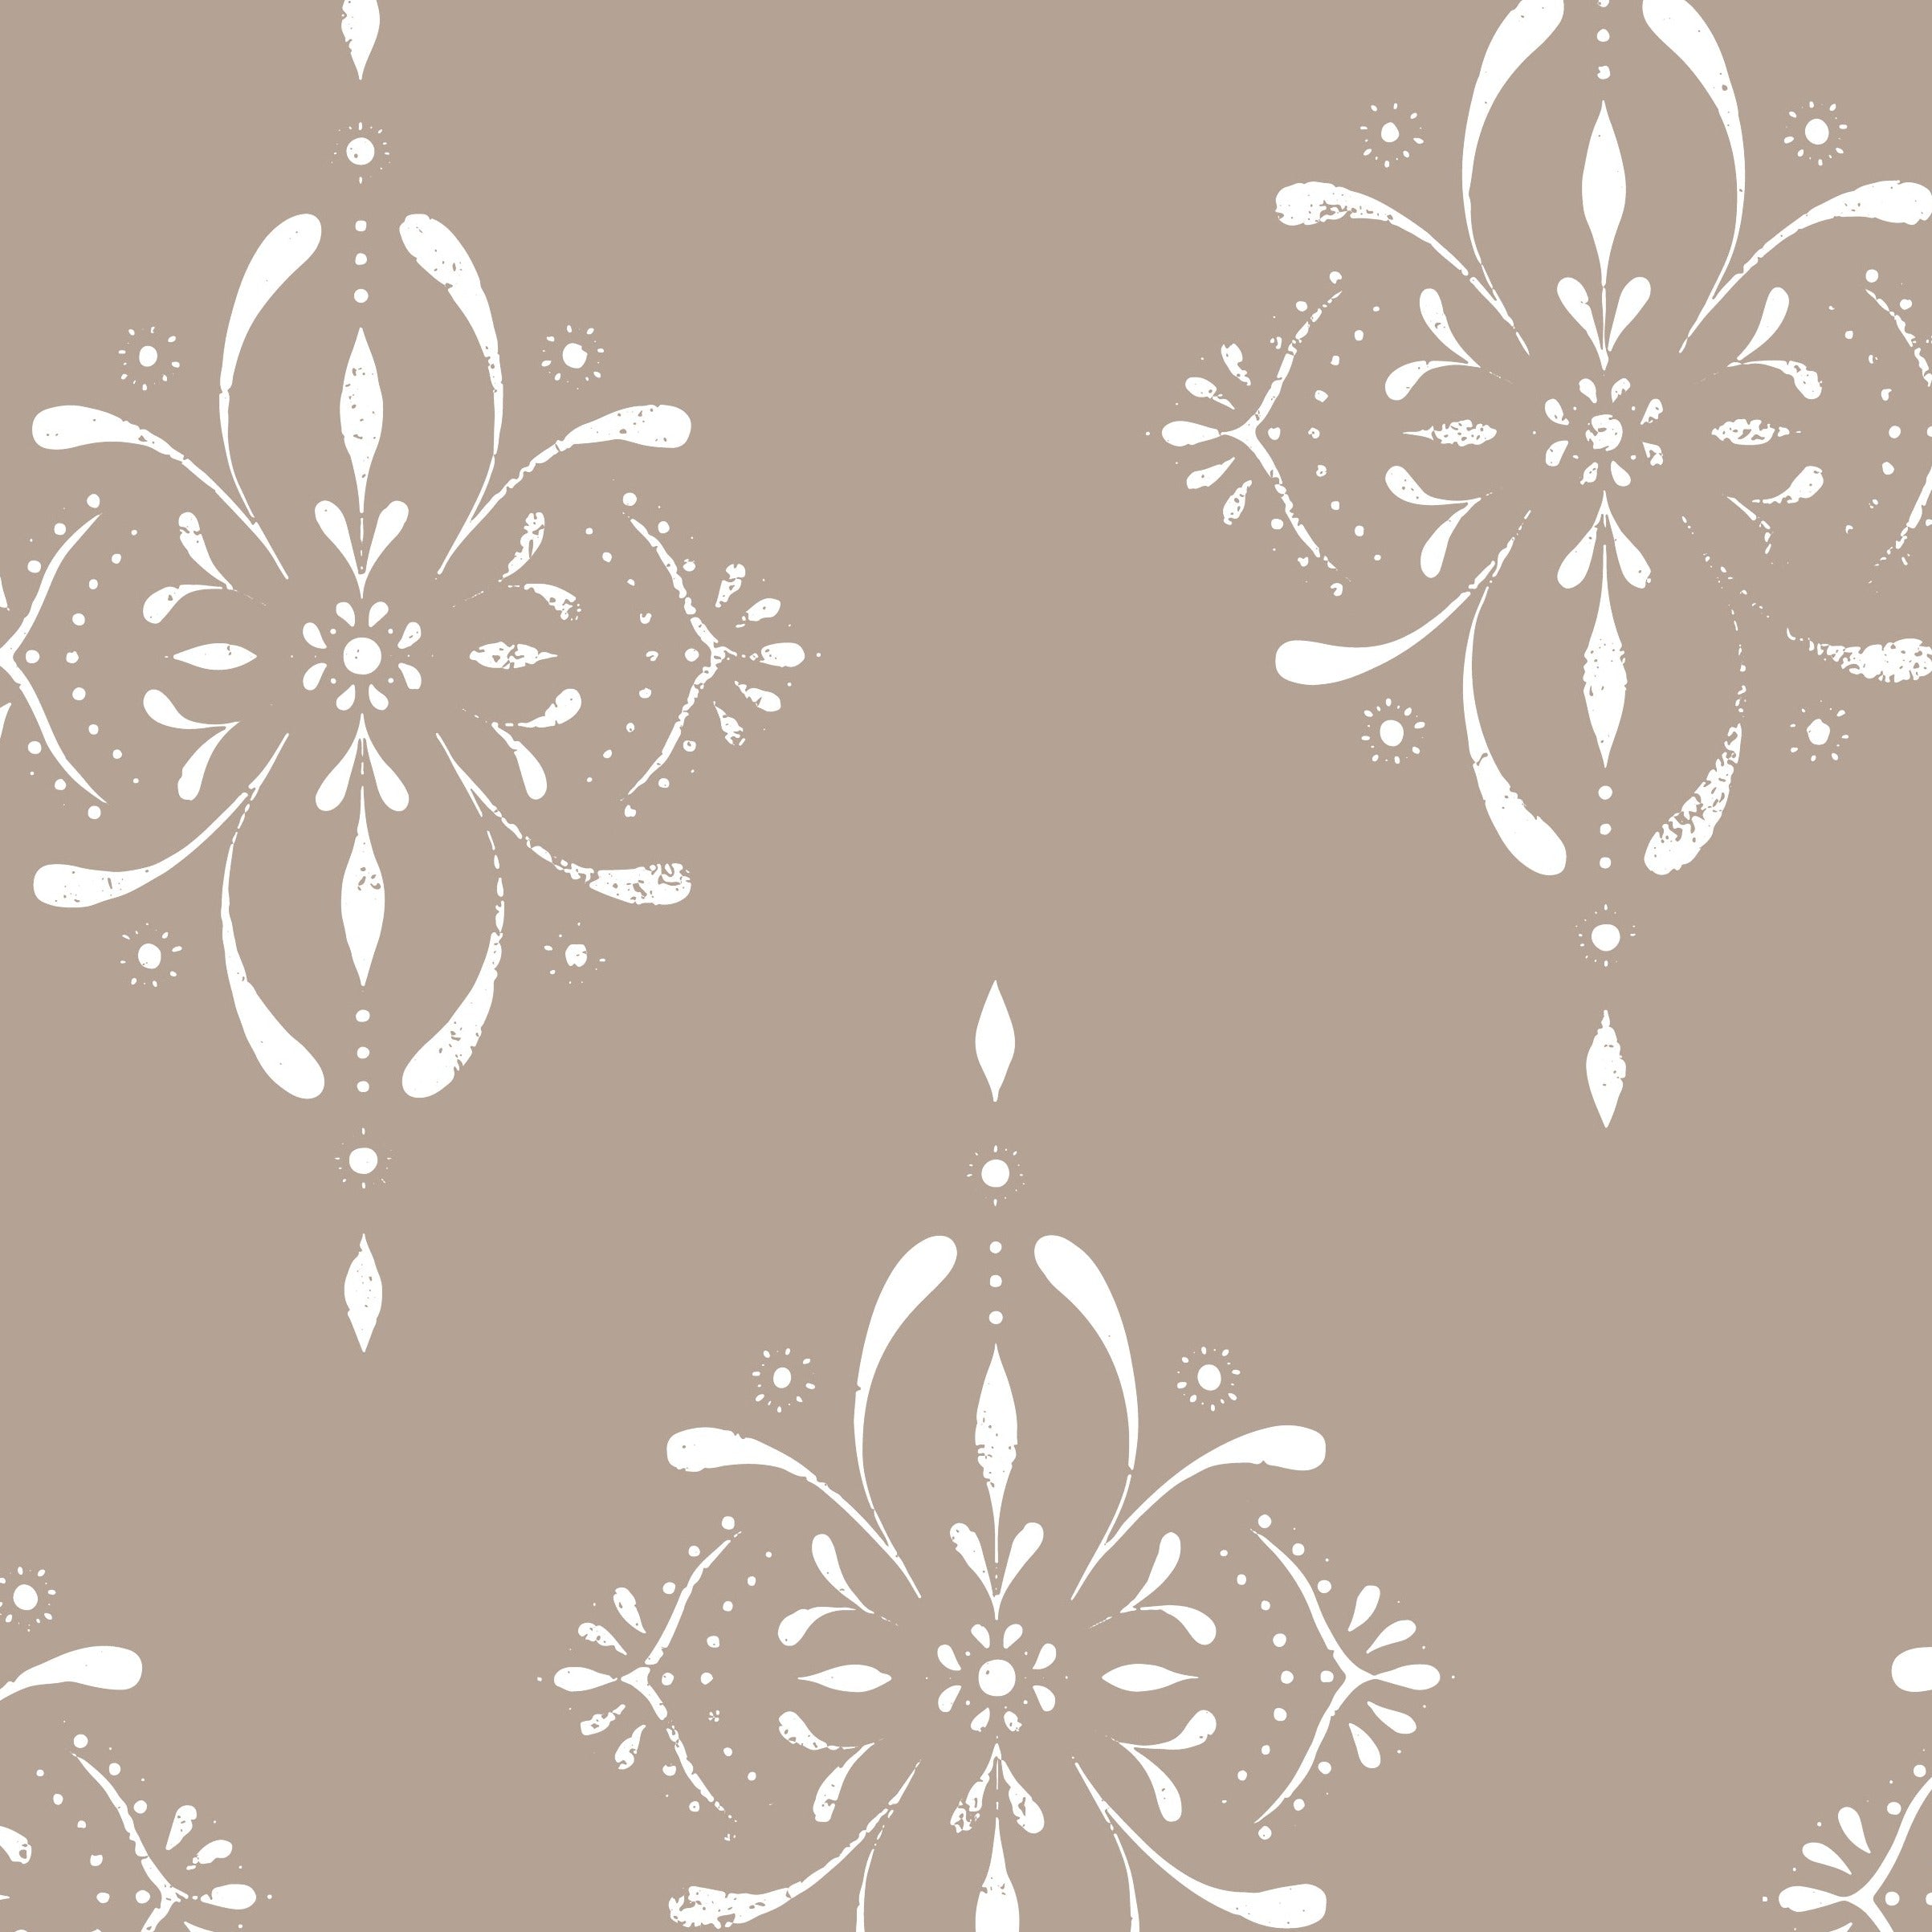 A close-up view of the Rustic Elegance Wallpaper, highlighting the intricate white floral design on a beige background. The pattern showcases detailed, symmetrical floral elements with a vintage feel.